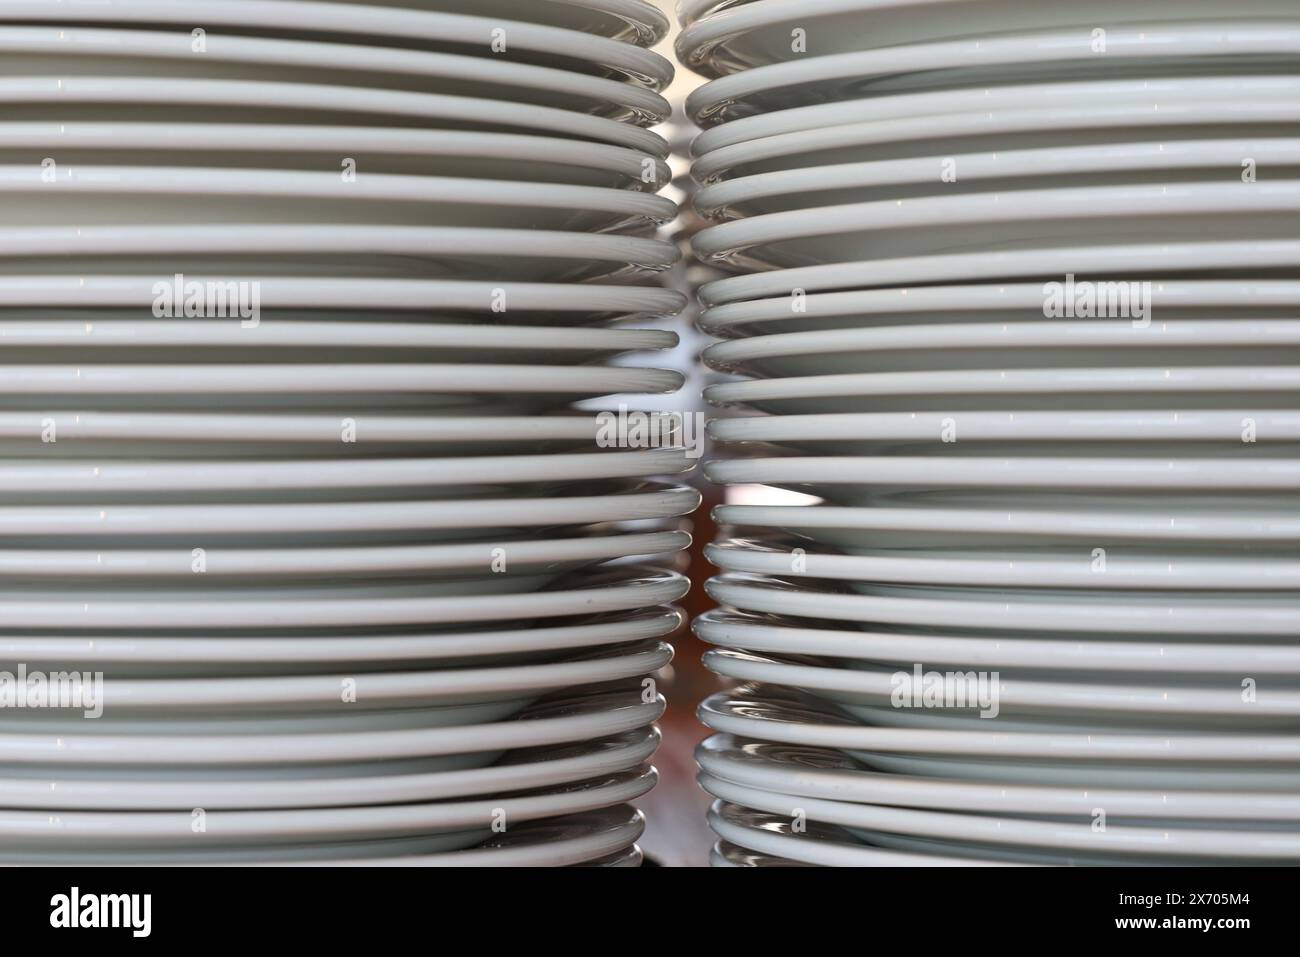 Two stacks of plain white dinner plates photographed up close with a small gap between. Kitchen, function, catering or restaurant concept. Stock Photo